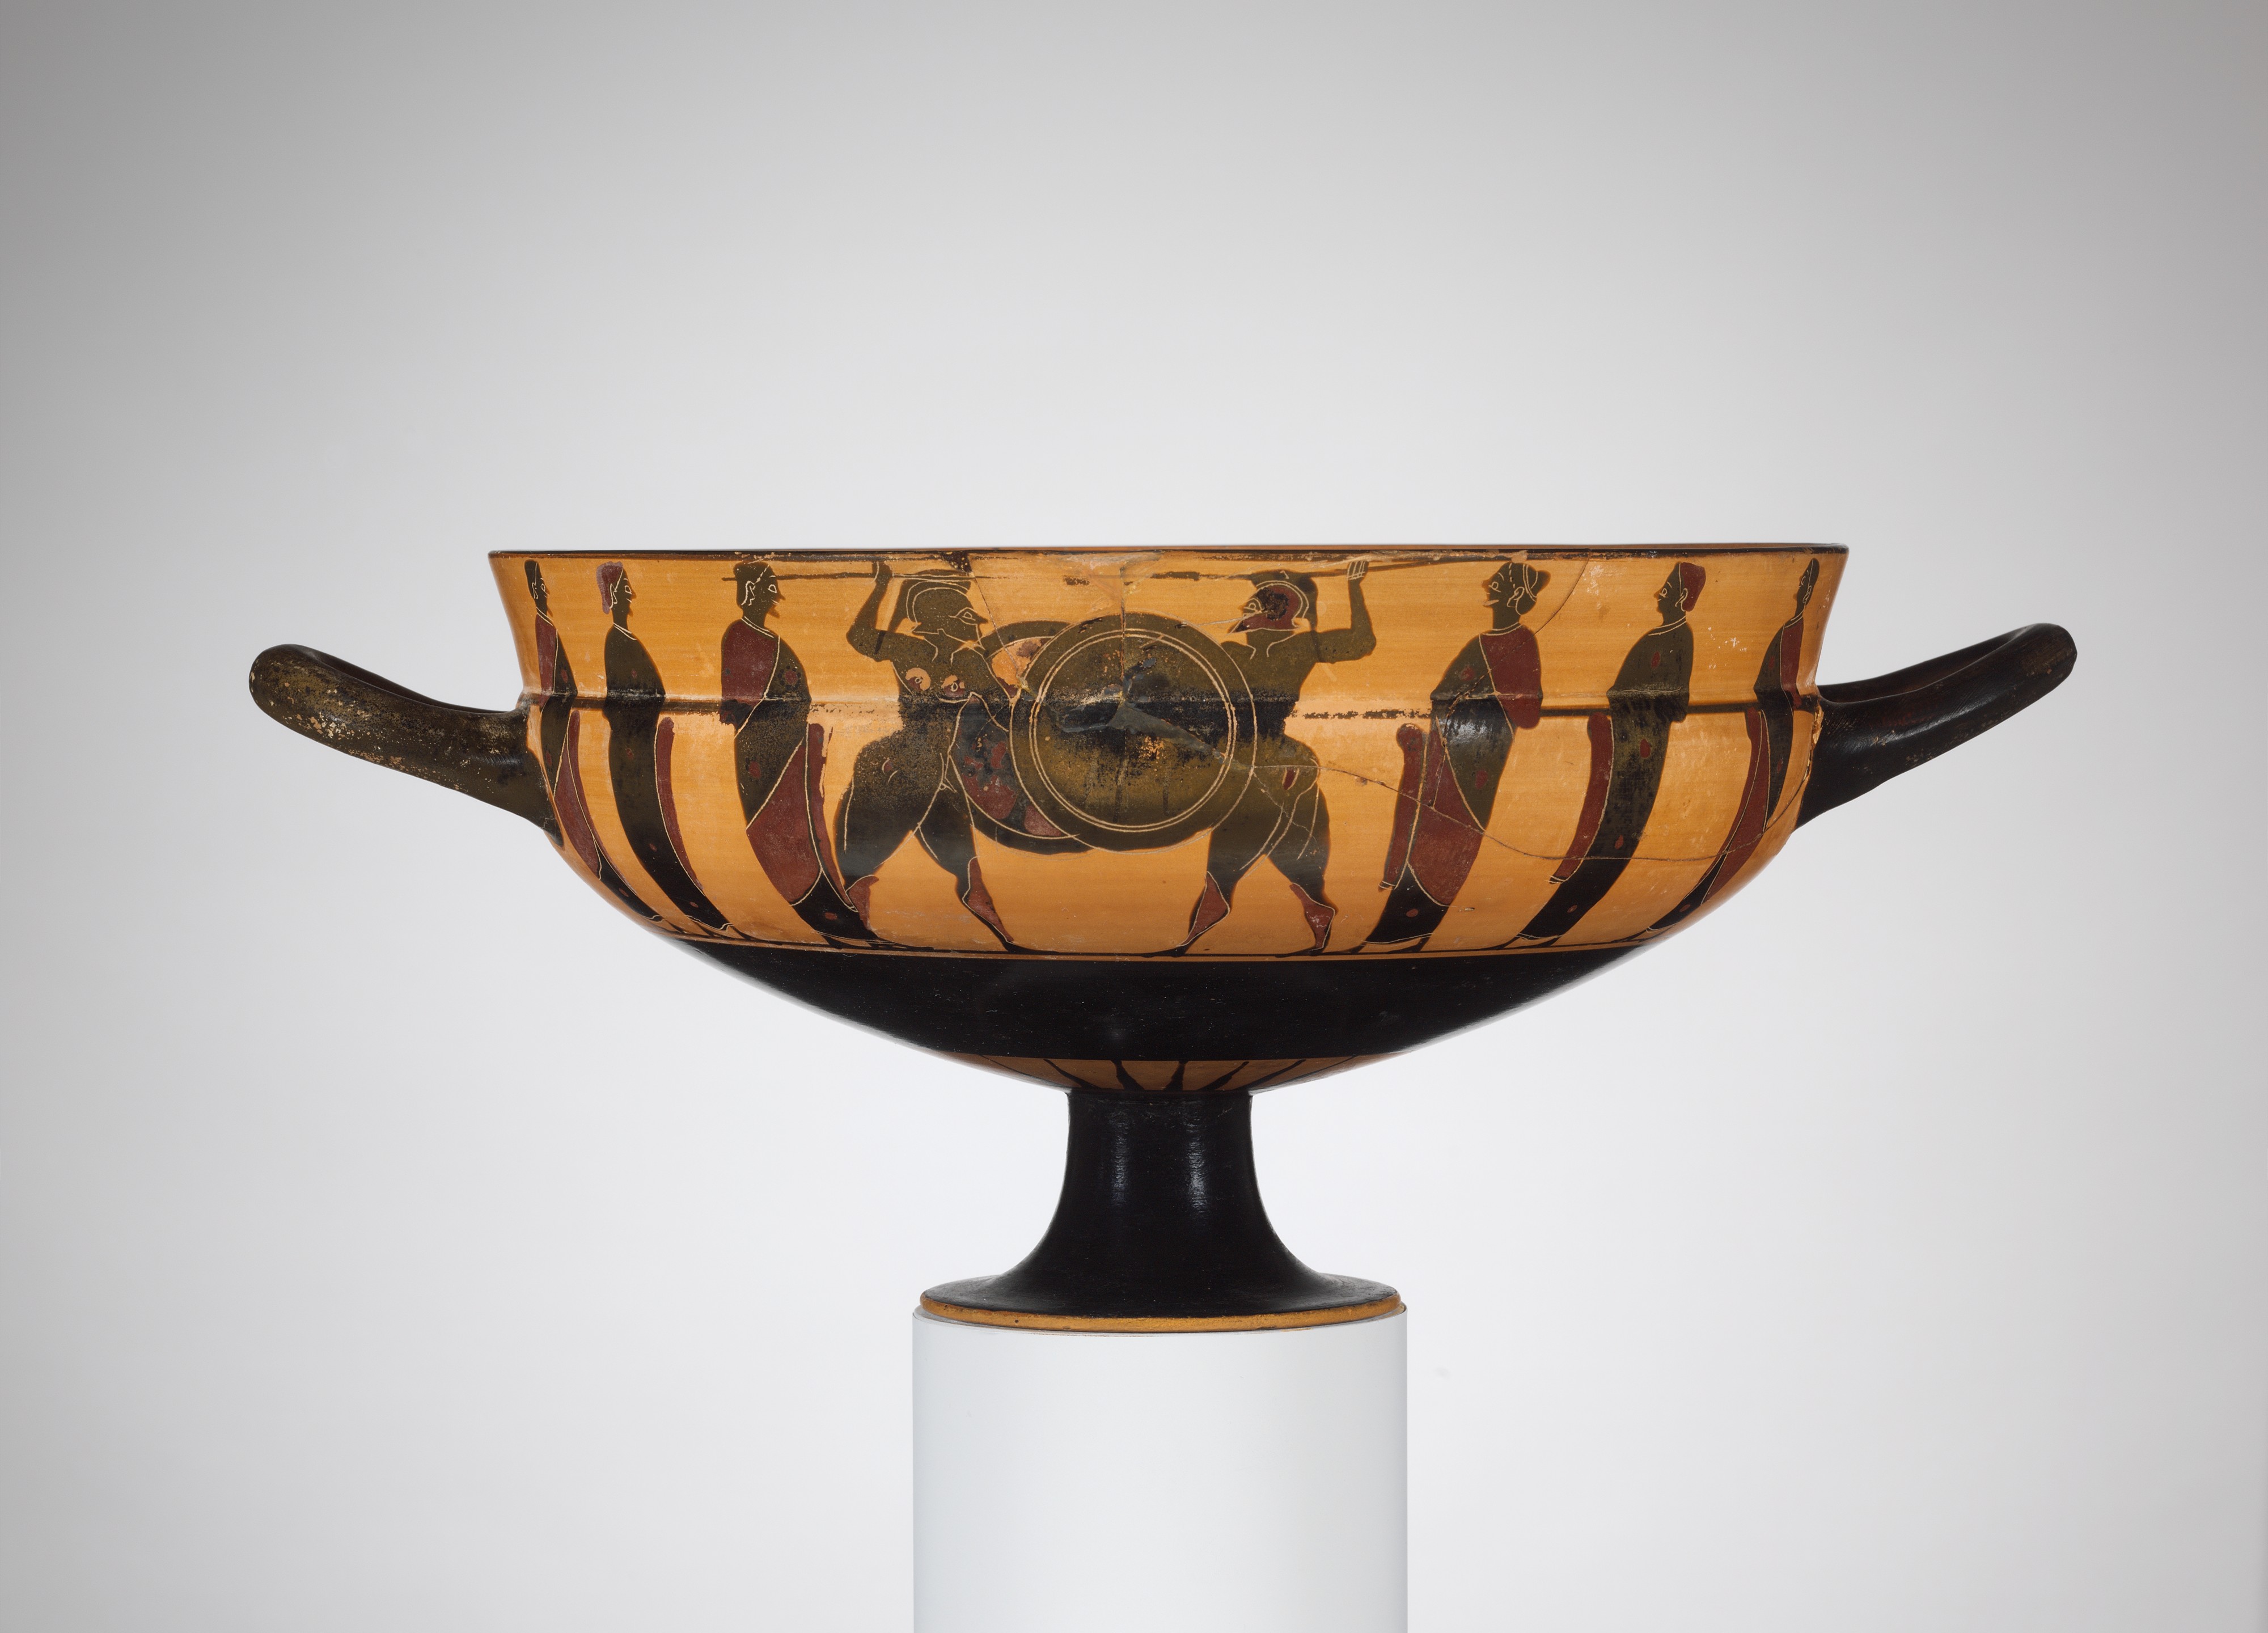 Terracotta Archaic cup (drinking Art Siana Museum | | cup) | kylix: Greek, The Painter Attic the of Attributed to | Metropolitan Sandal